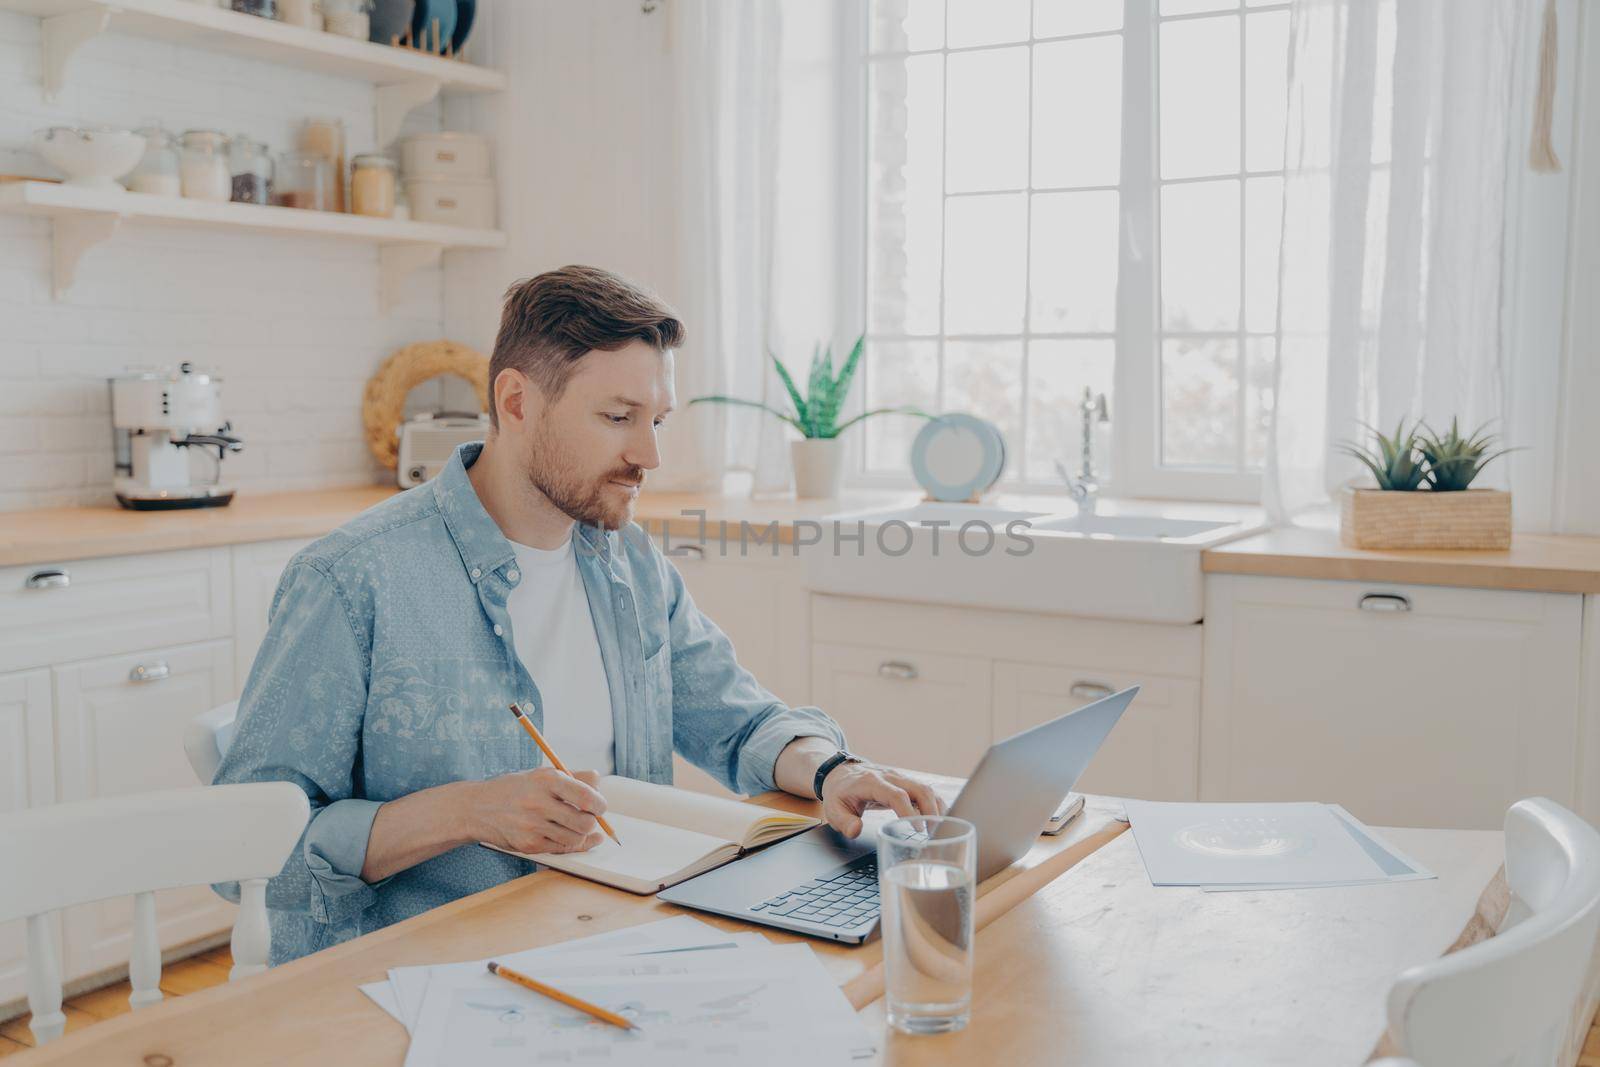 Serious man working on laptop online at kitchen table by vkstock